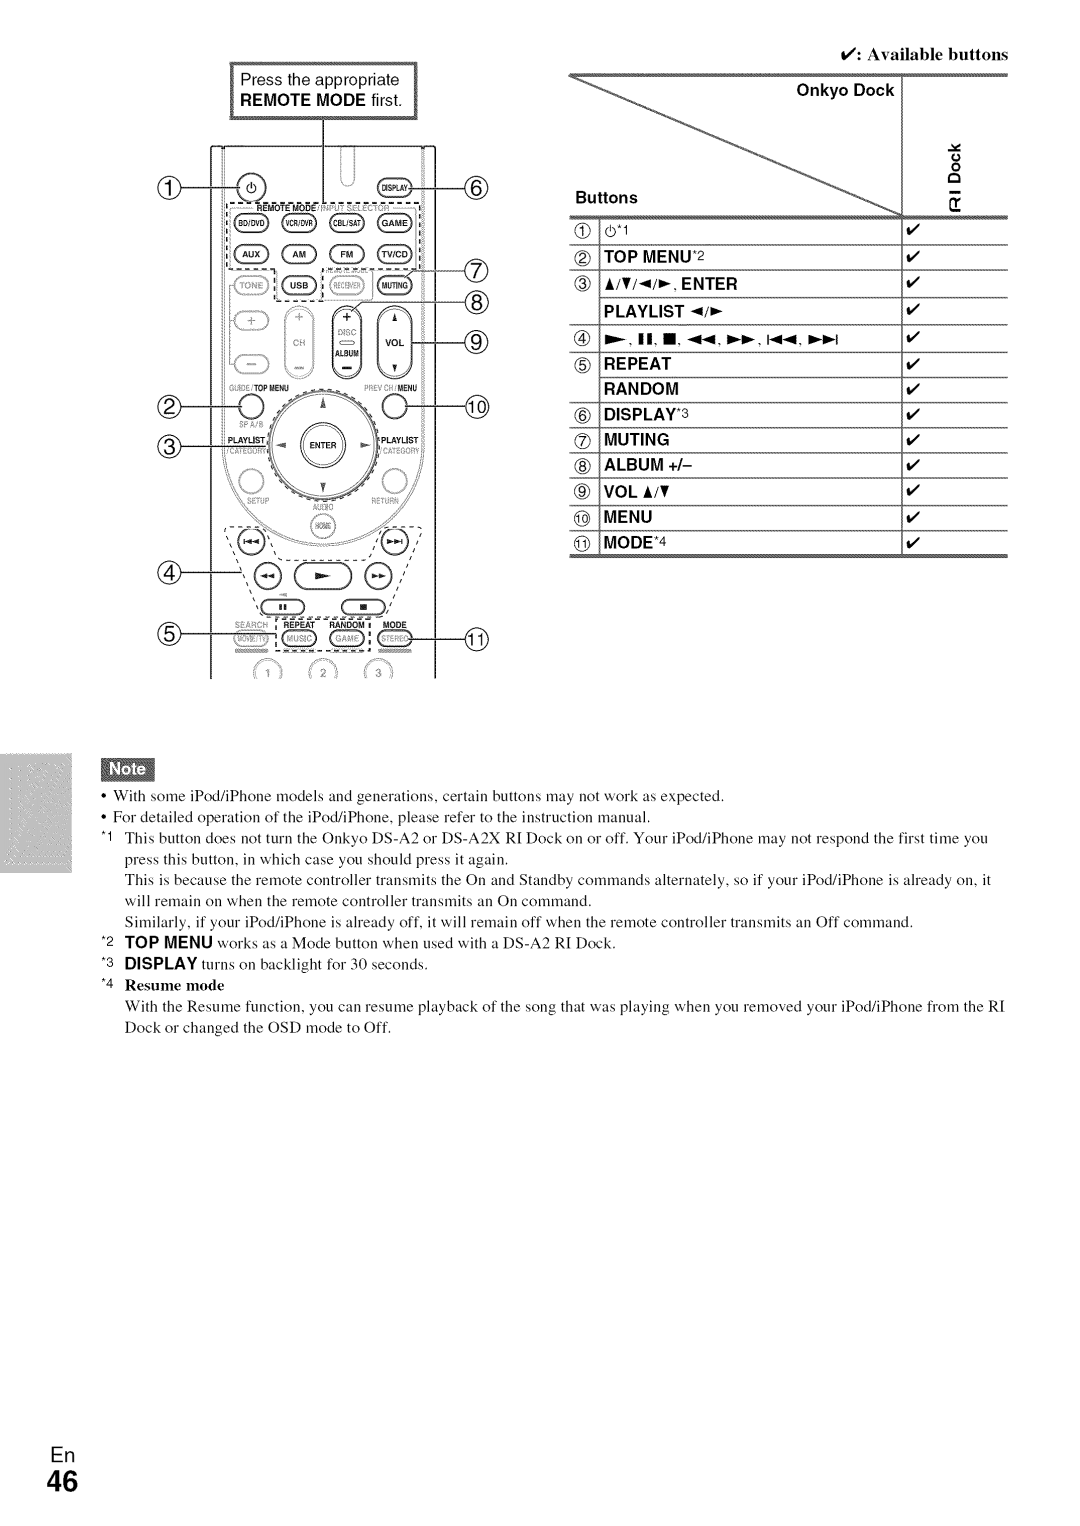 Onkyo HT-R590 instruction manual _: Available buttons, I REMOTEPress the appropriateMODE first 